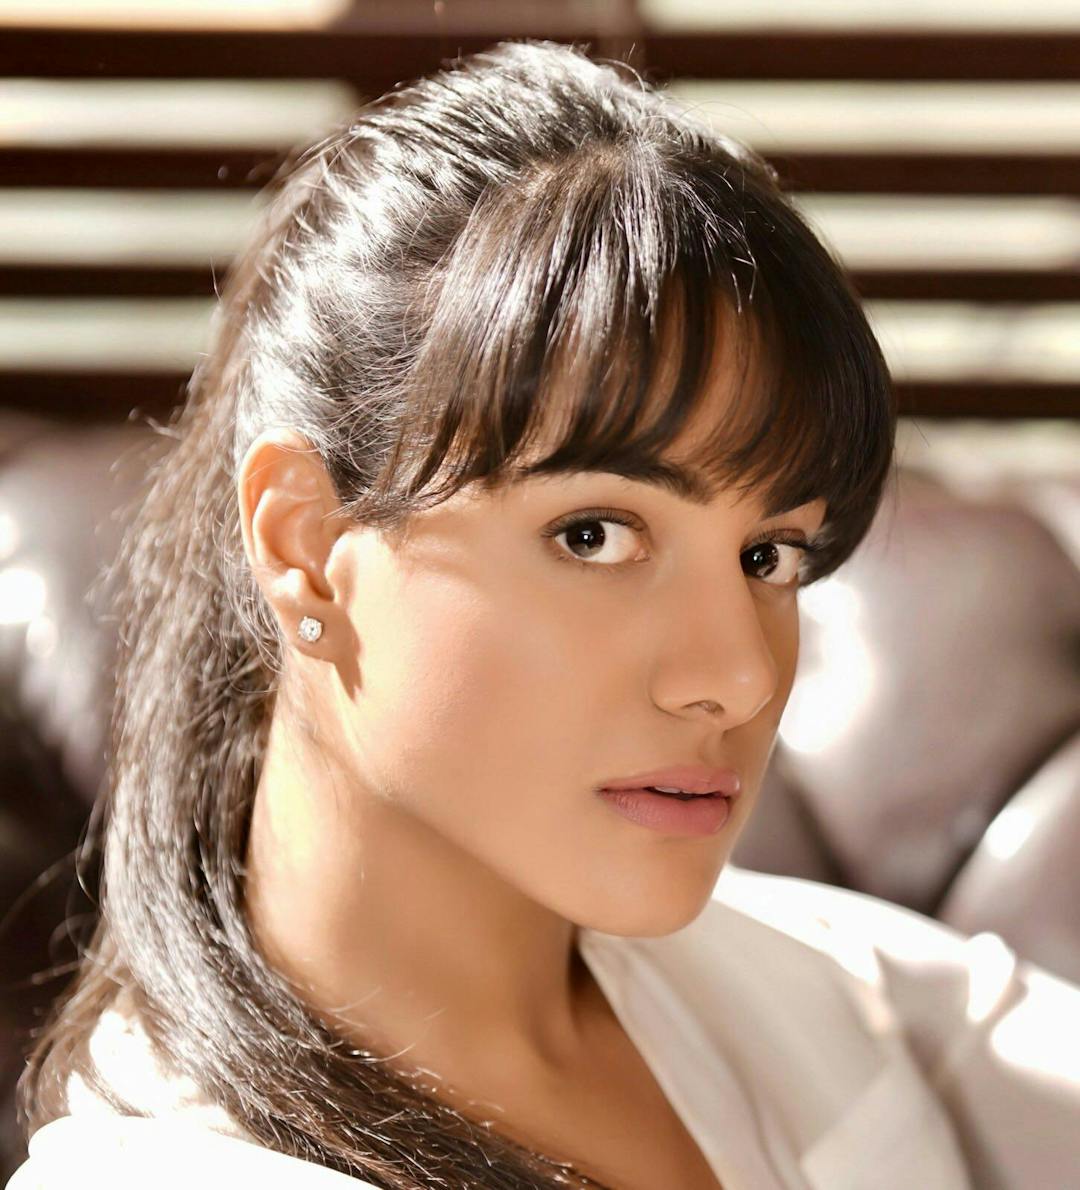 A woman with straight, dark hair and bangs, wearing a white top and earrings, looks directly at the camera in a brightly lit room with brown furniture and slatted blinds.